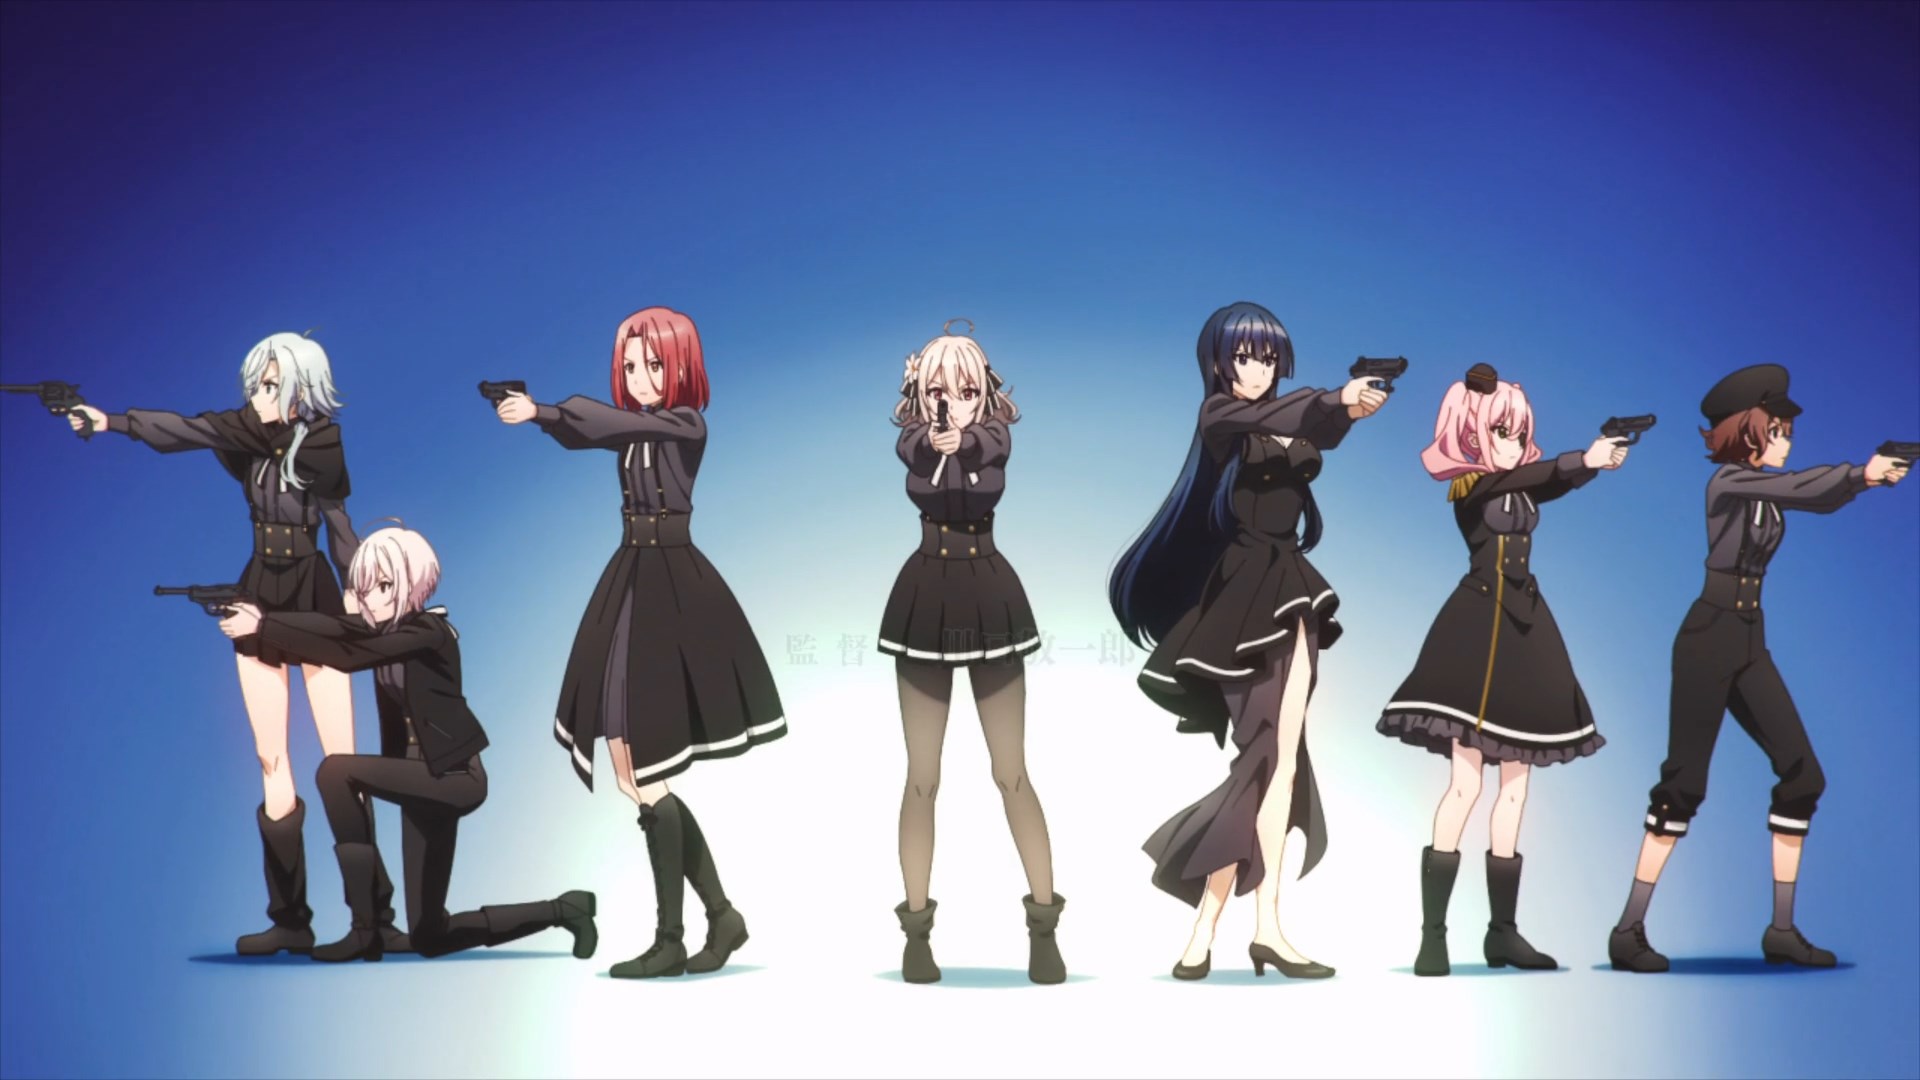 The seven spies looking like they stepped out a Key visual novel